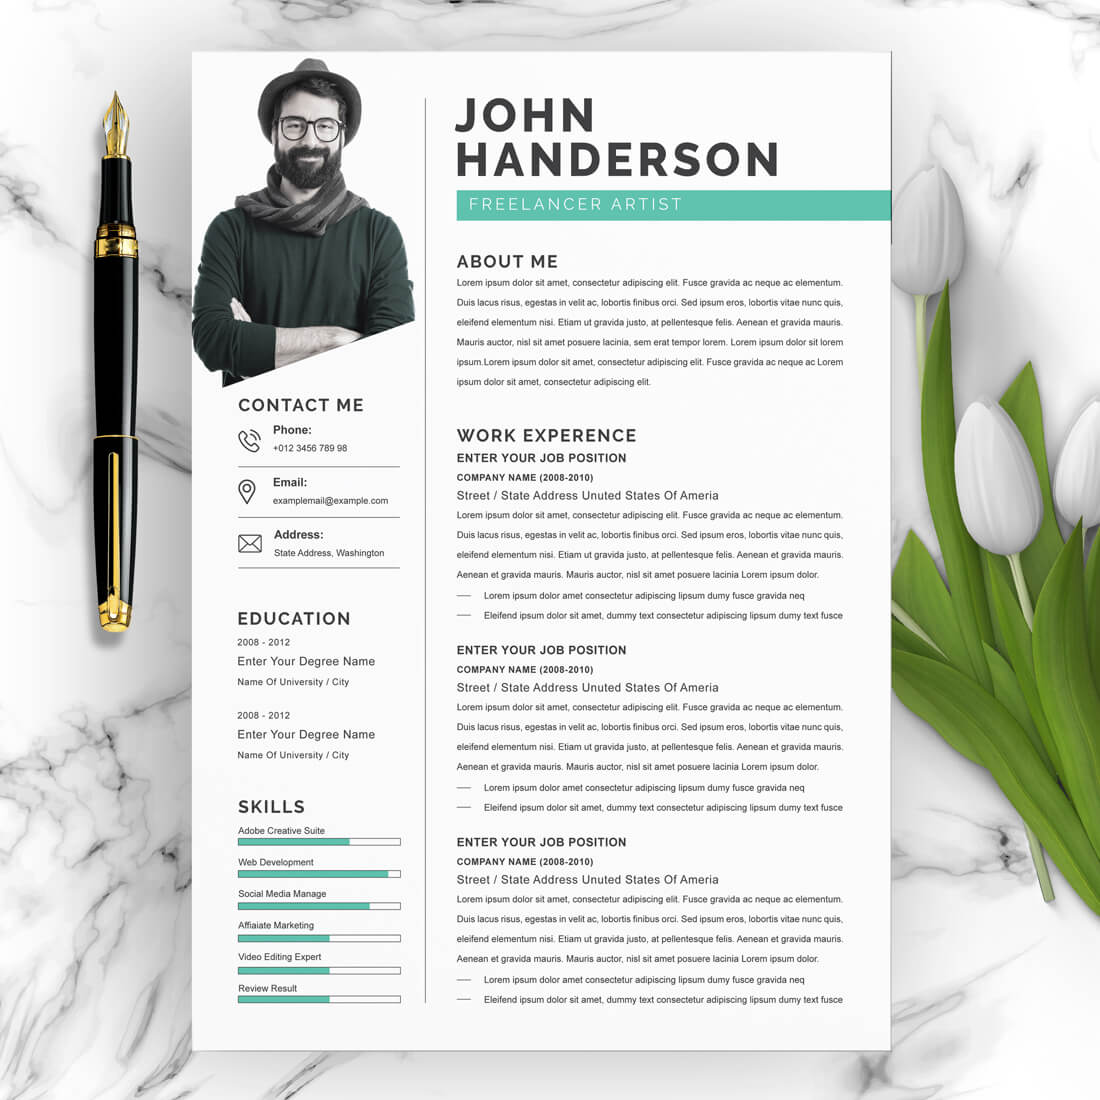 Freelancer Artist Resume Template | Resume and Cover | Modern Resume Template [MS Word Format] cover image.